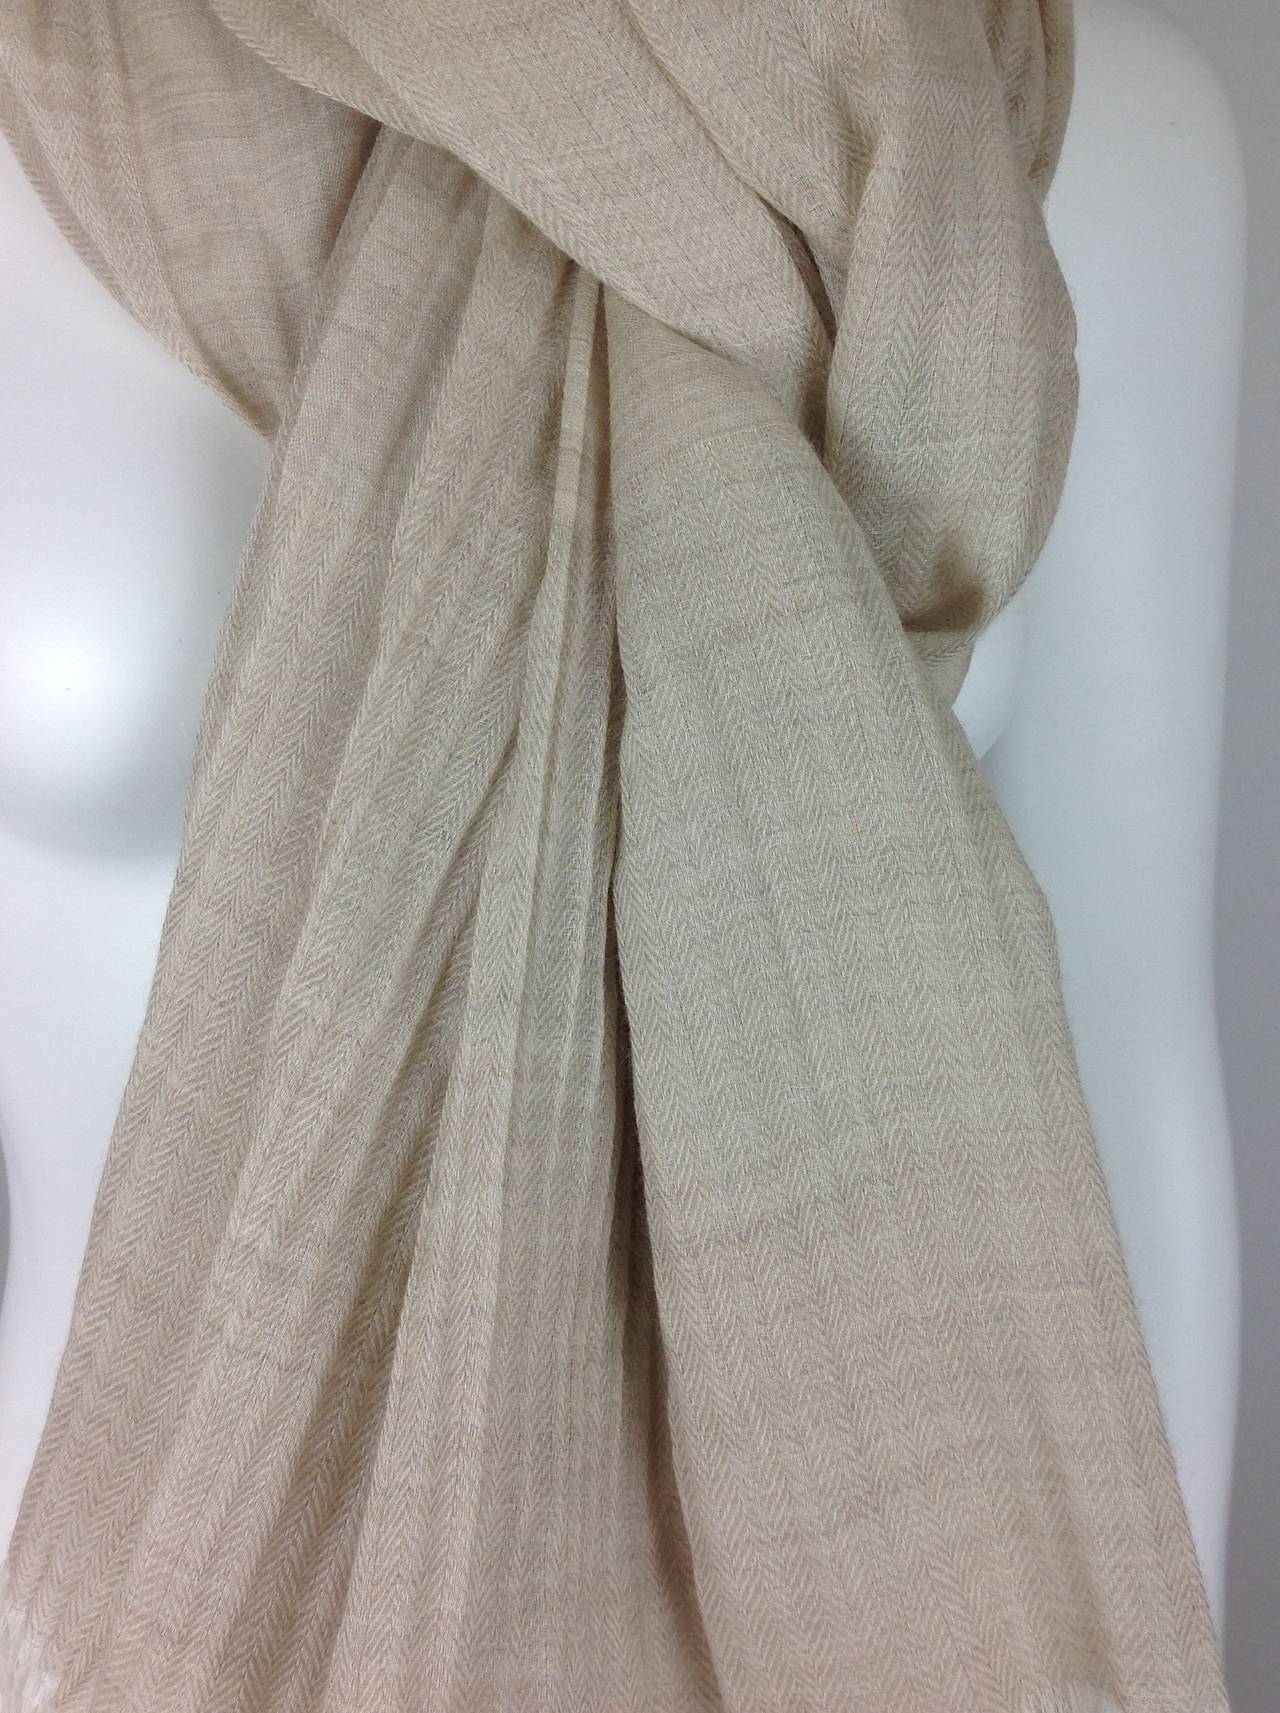 Tissue weight cashmere Hermes scarf shawl In Excellent Condition In Palm Beach, FL